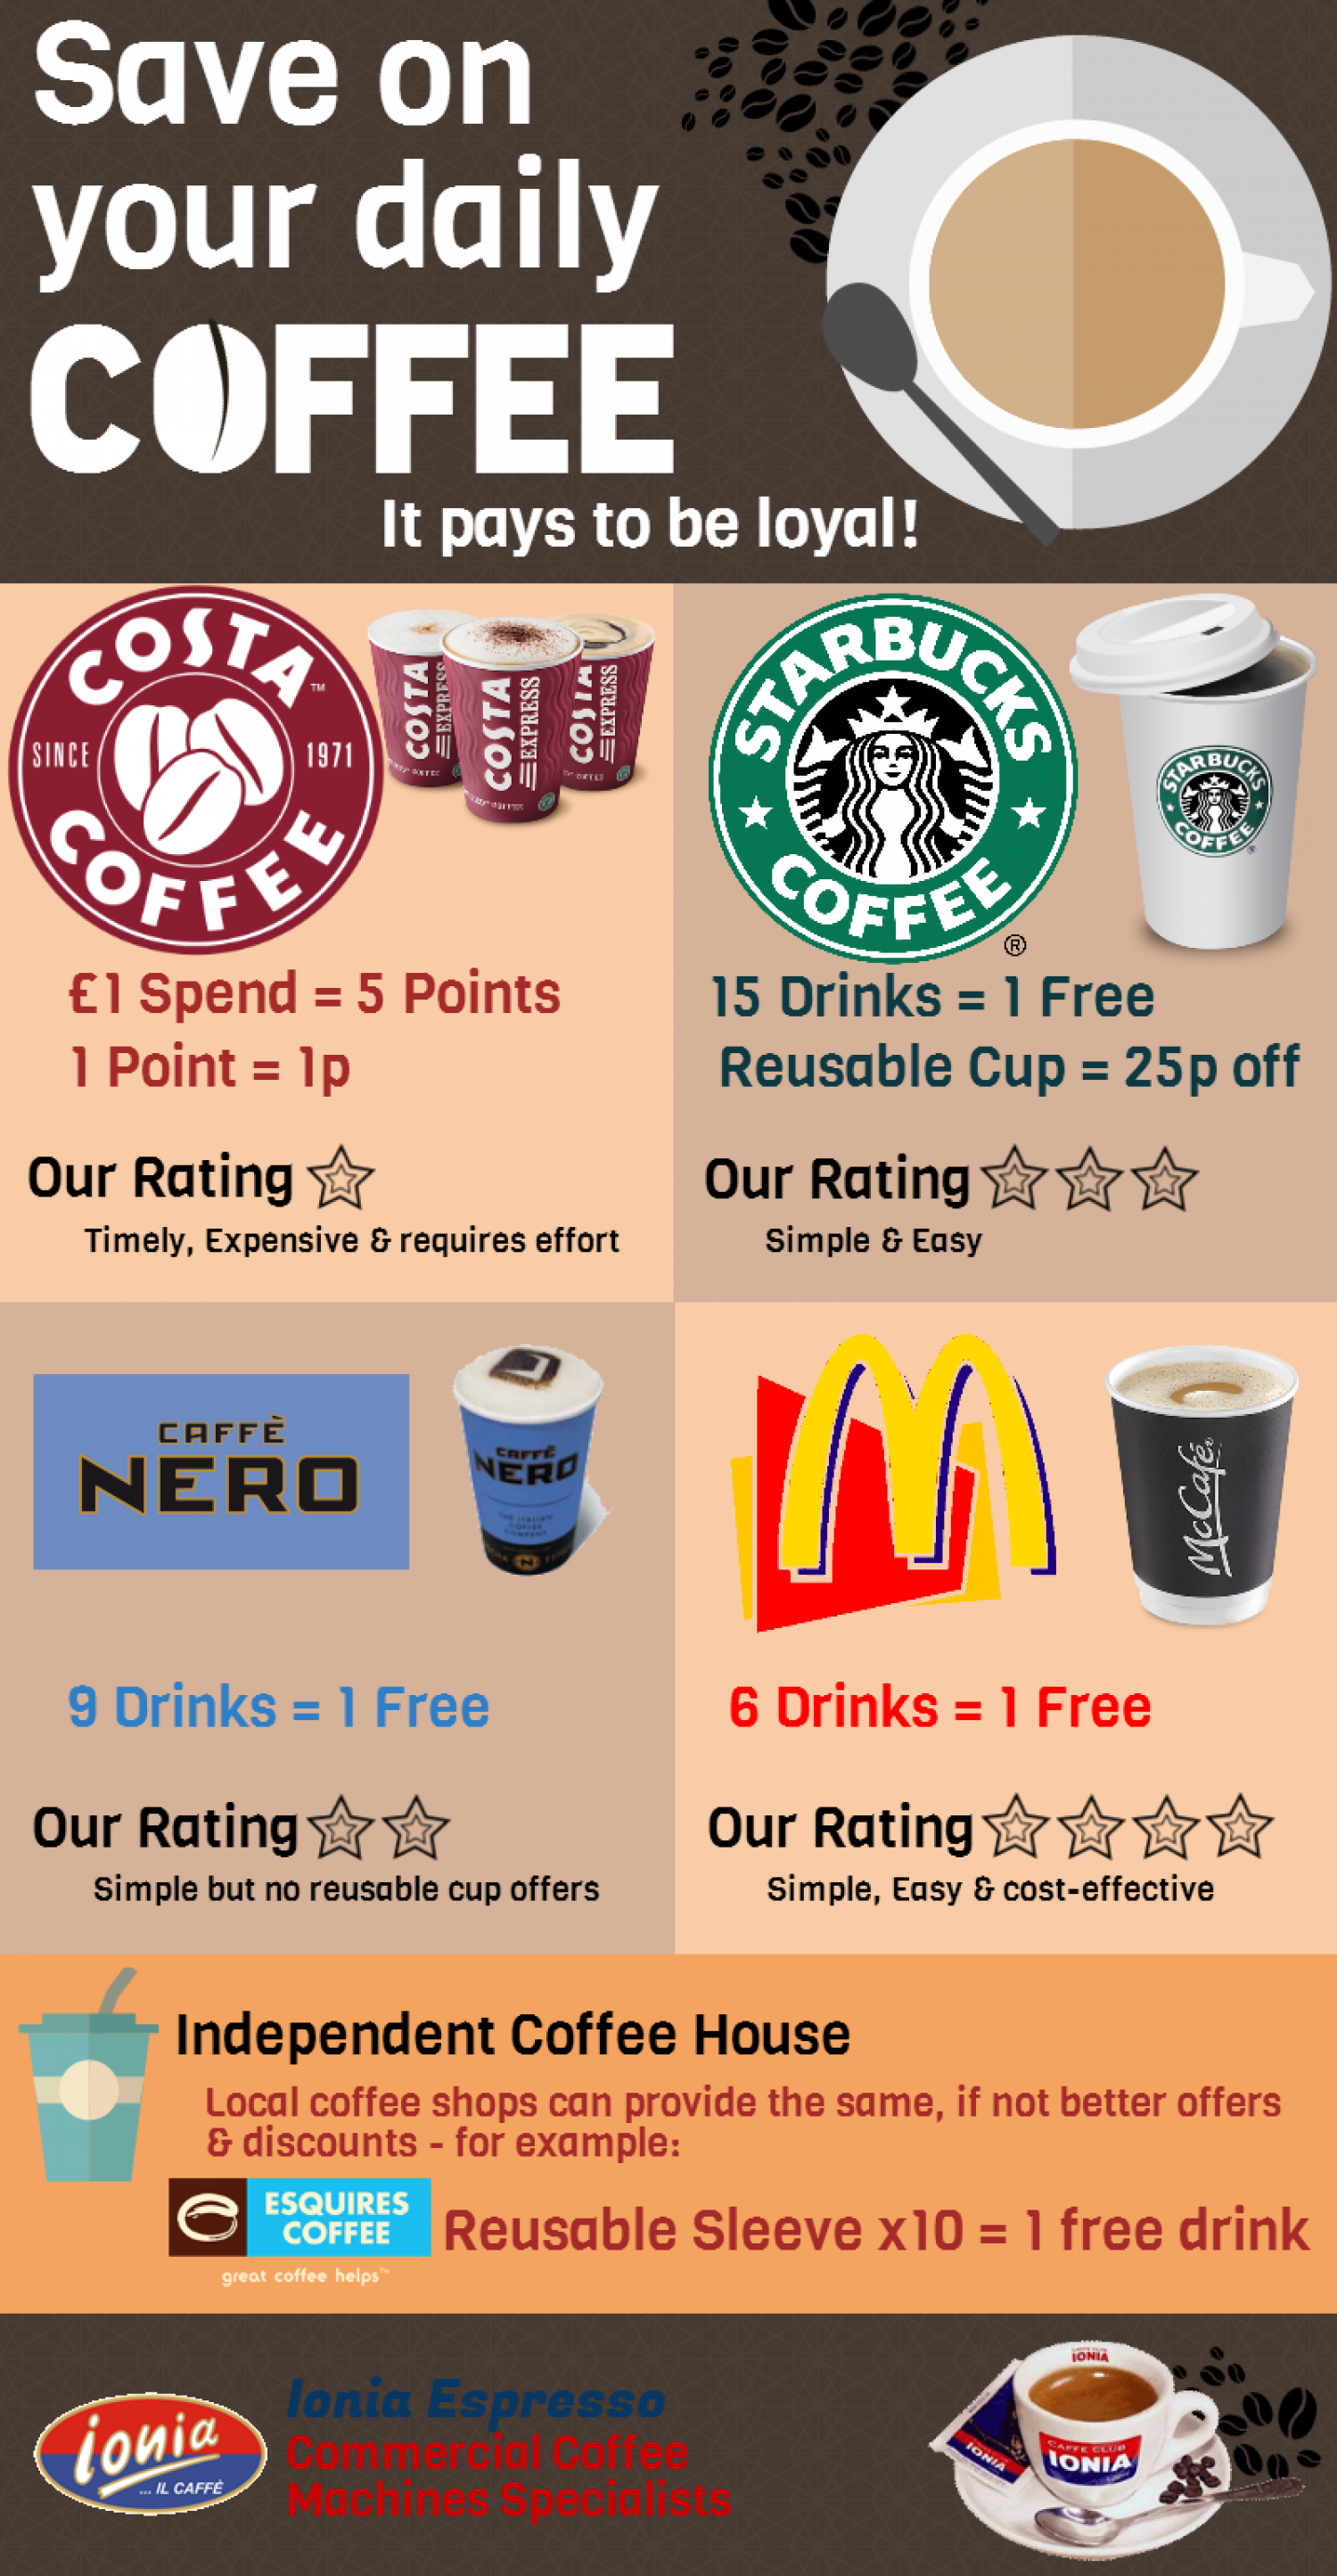 Save on your daily Coffee Infographic